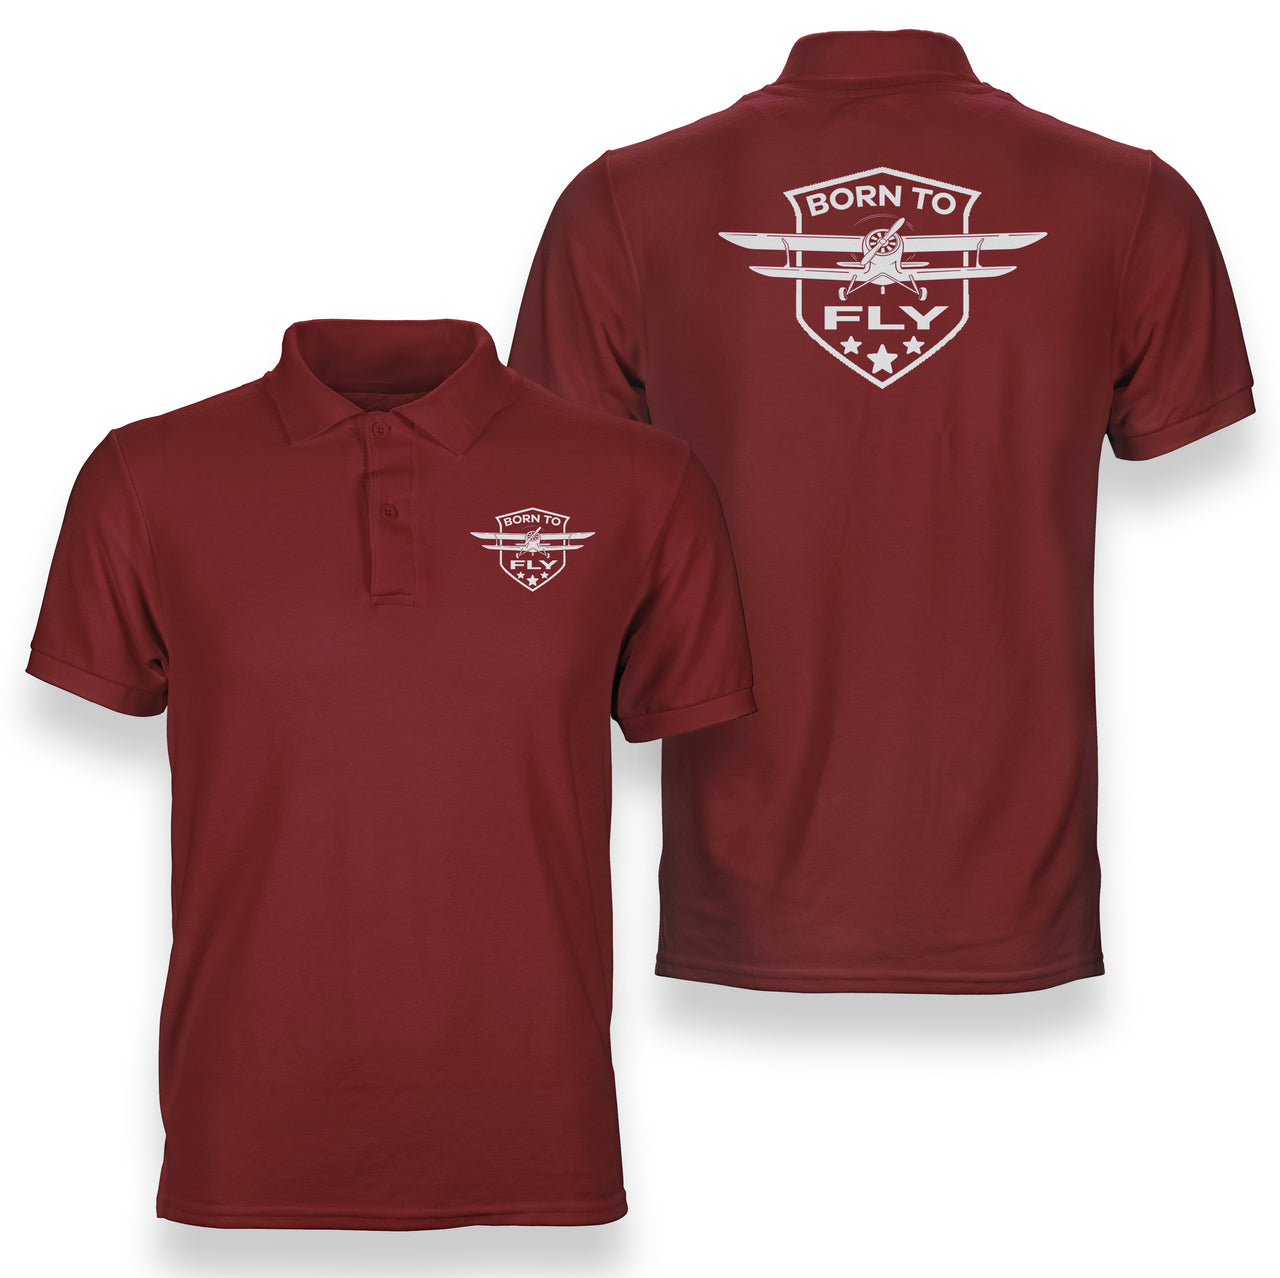 Born To Fly Designed Designed Double Side Polo T-Shirts